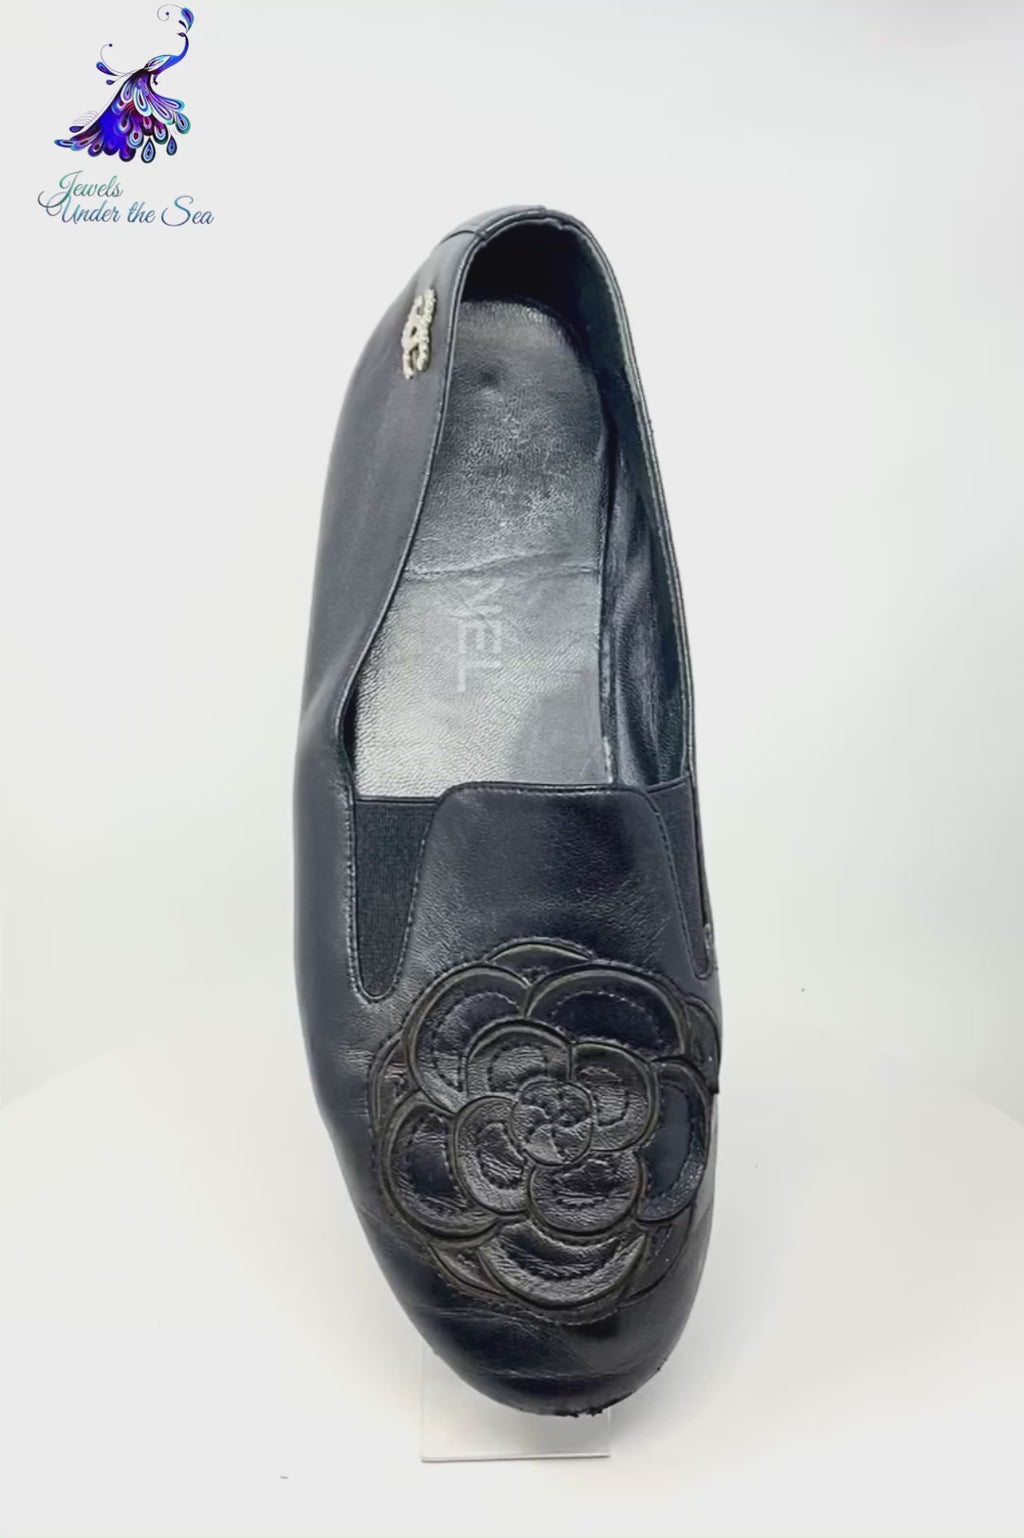 CHANEL Black Leather Camellia Moccasin Loafers Size 38